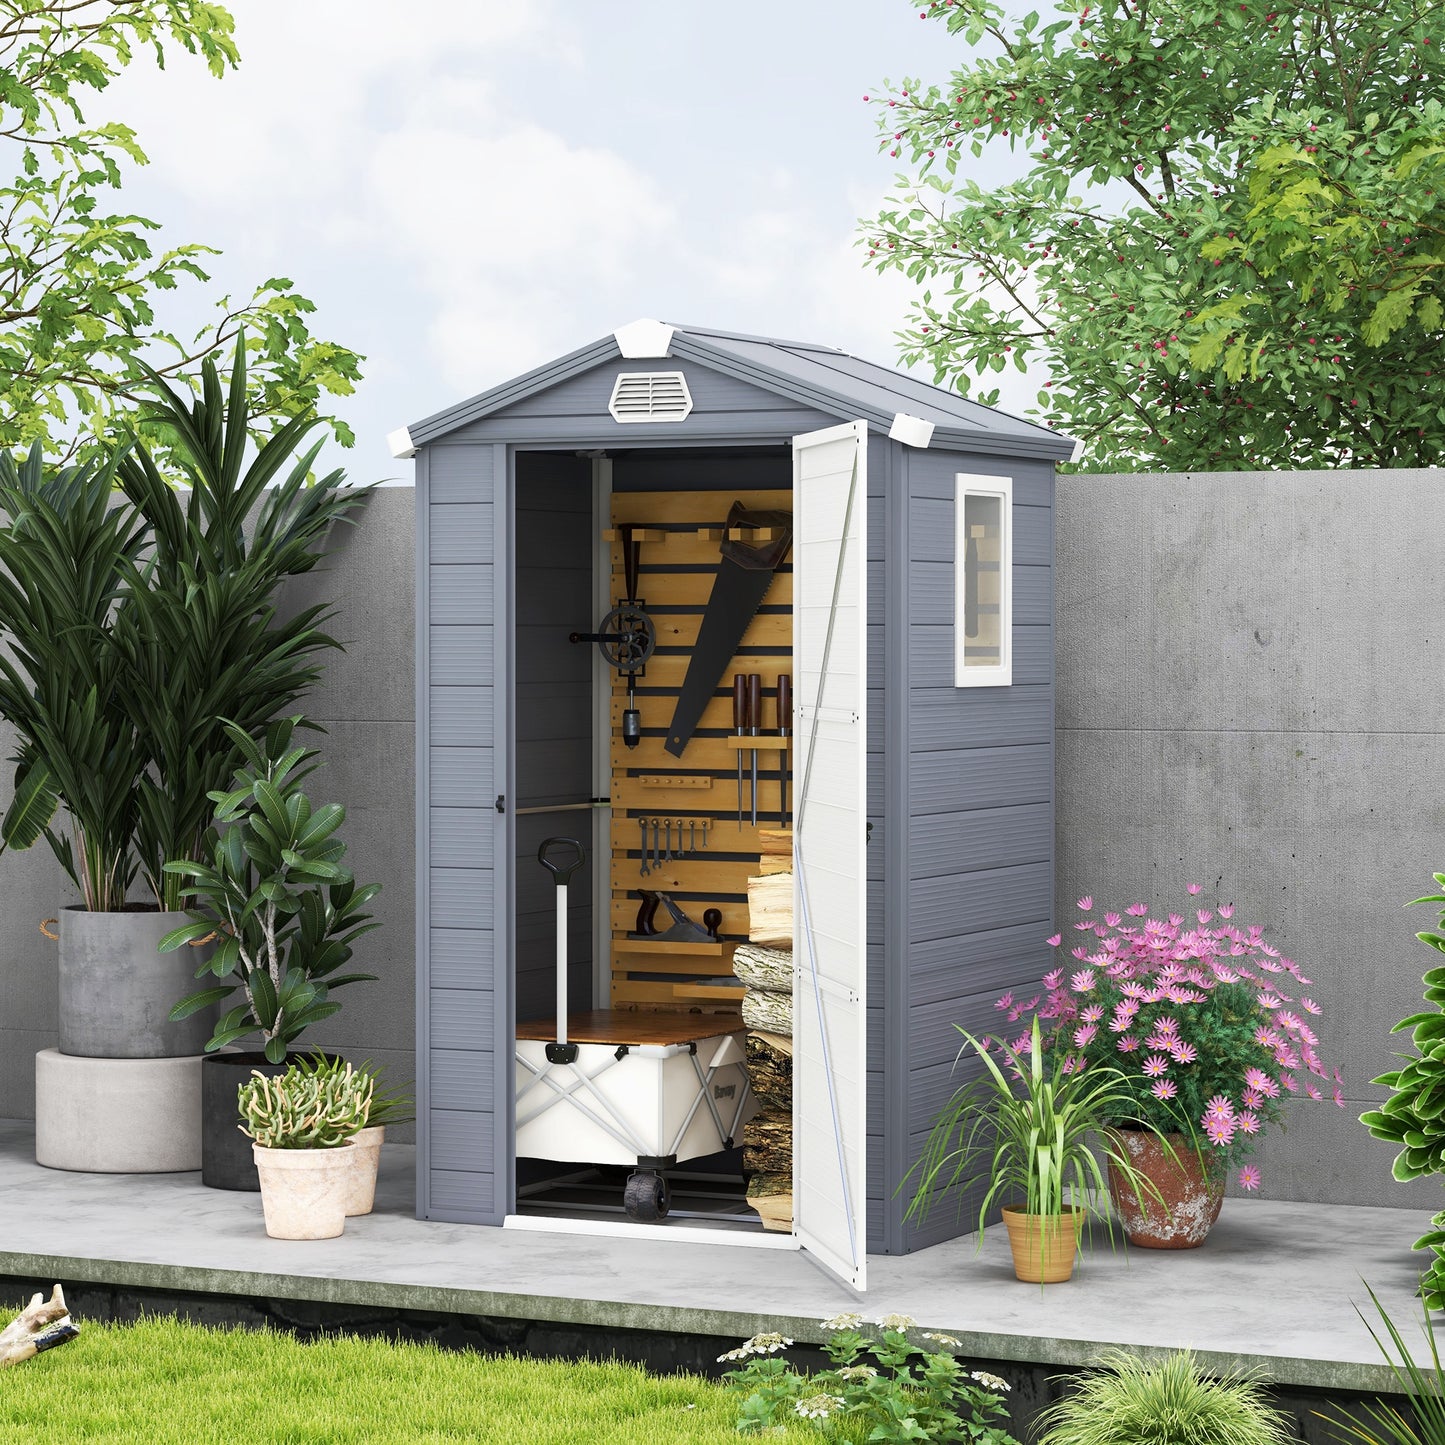 Outsunny 4 x 3ft Garden Shed with Foundation Kit, Polypropylene Outdoor Storage Tool House with Ventilation Slots and Lockable Door, Grey